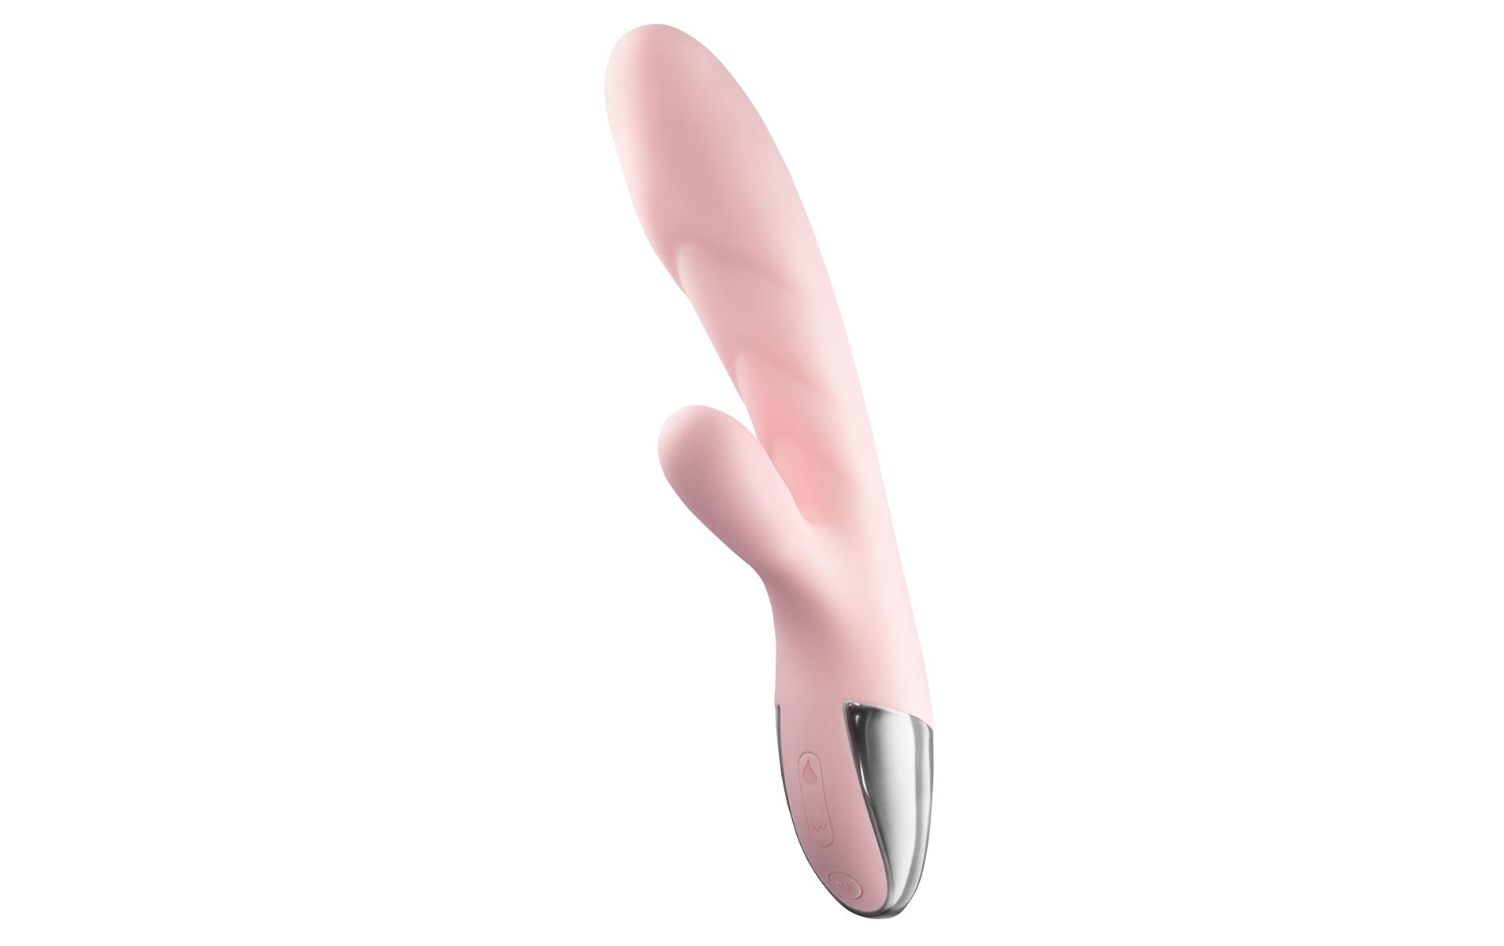 sex toy functions: heated vibrators